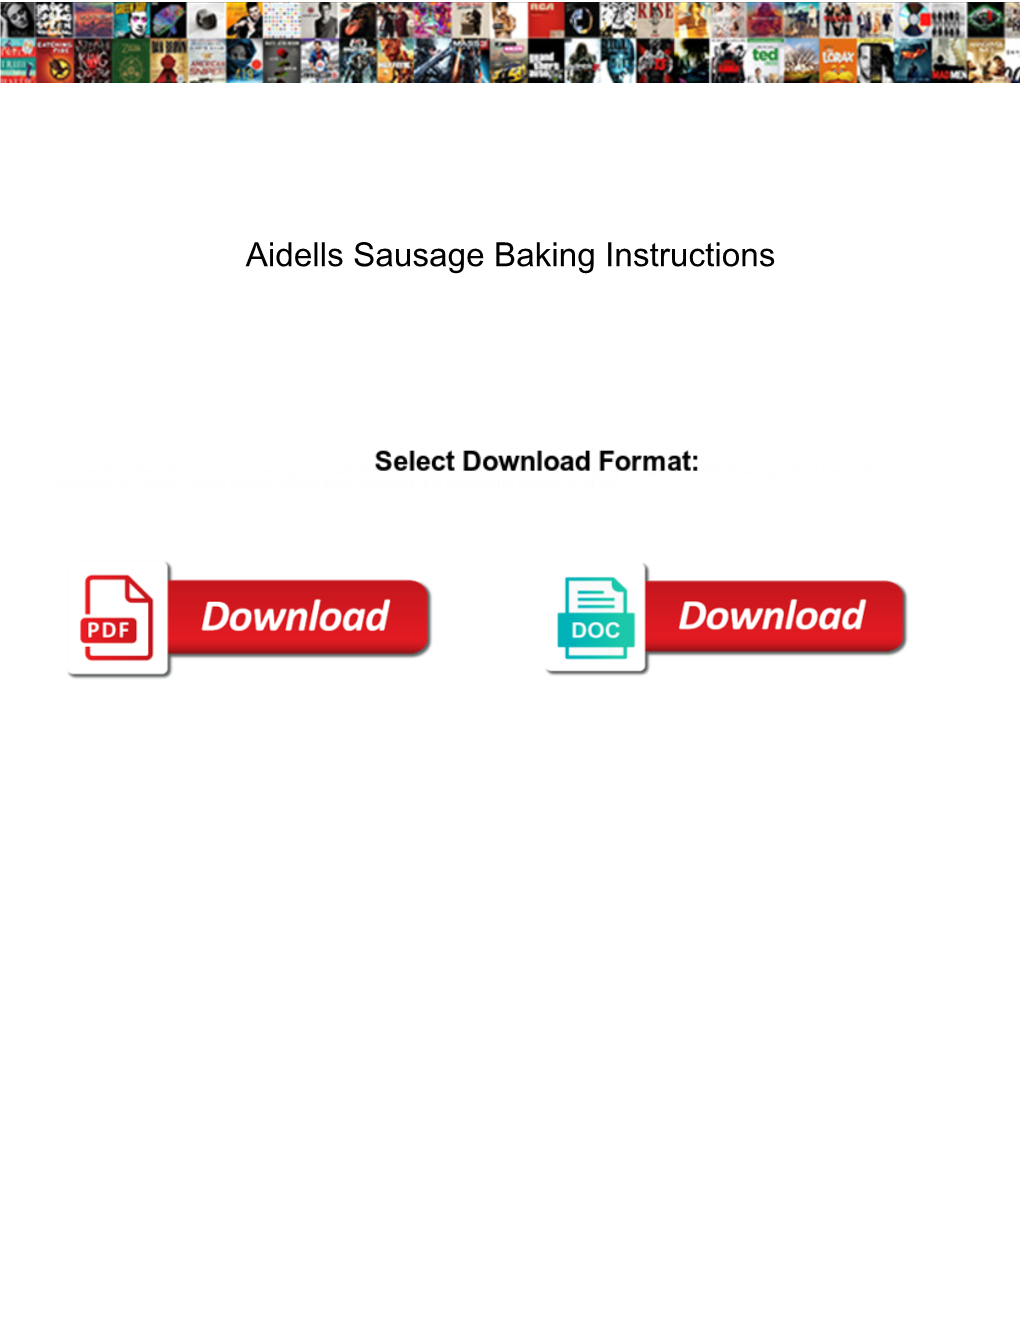 Aidells Sausage Baking Instructions